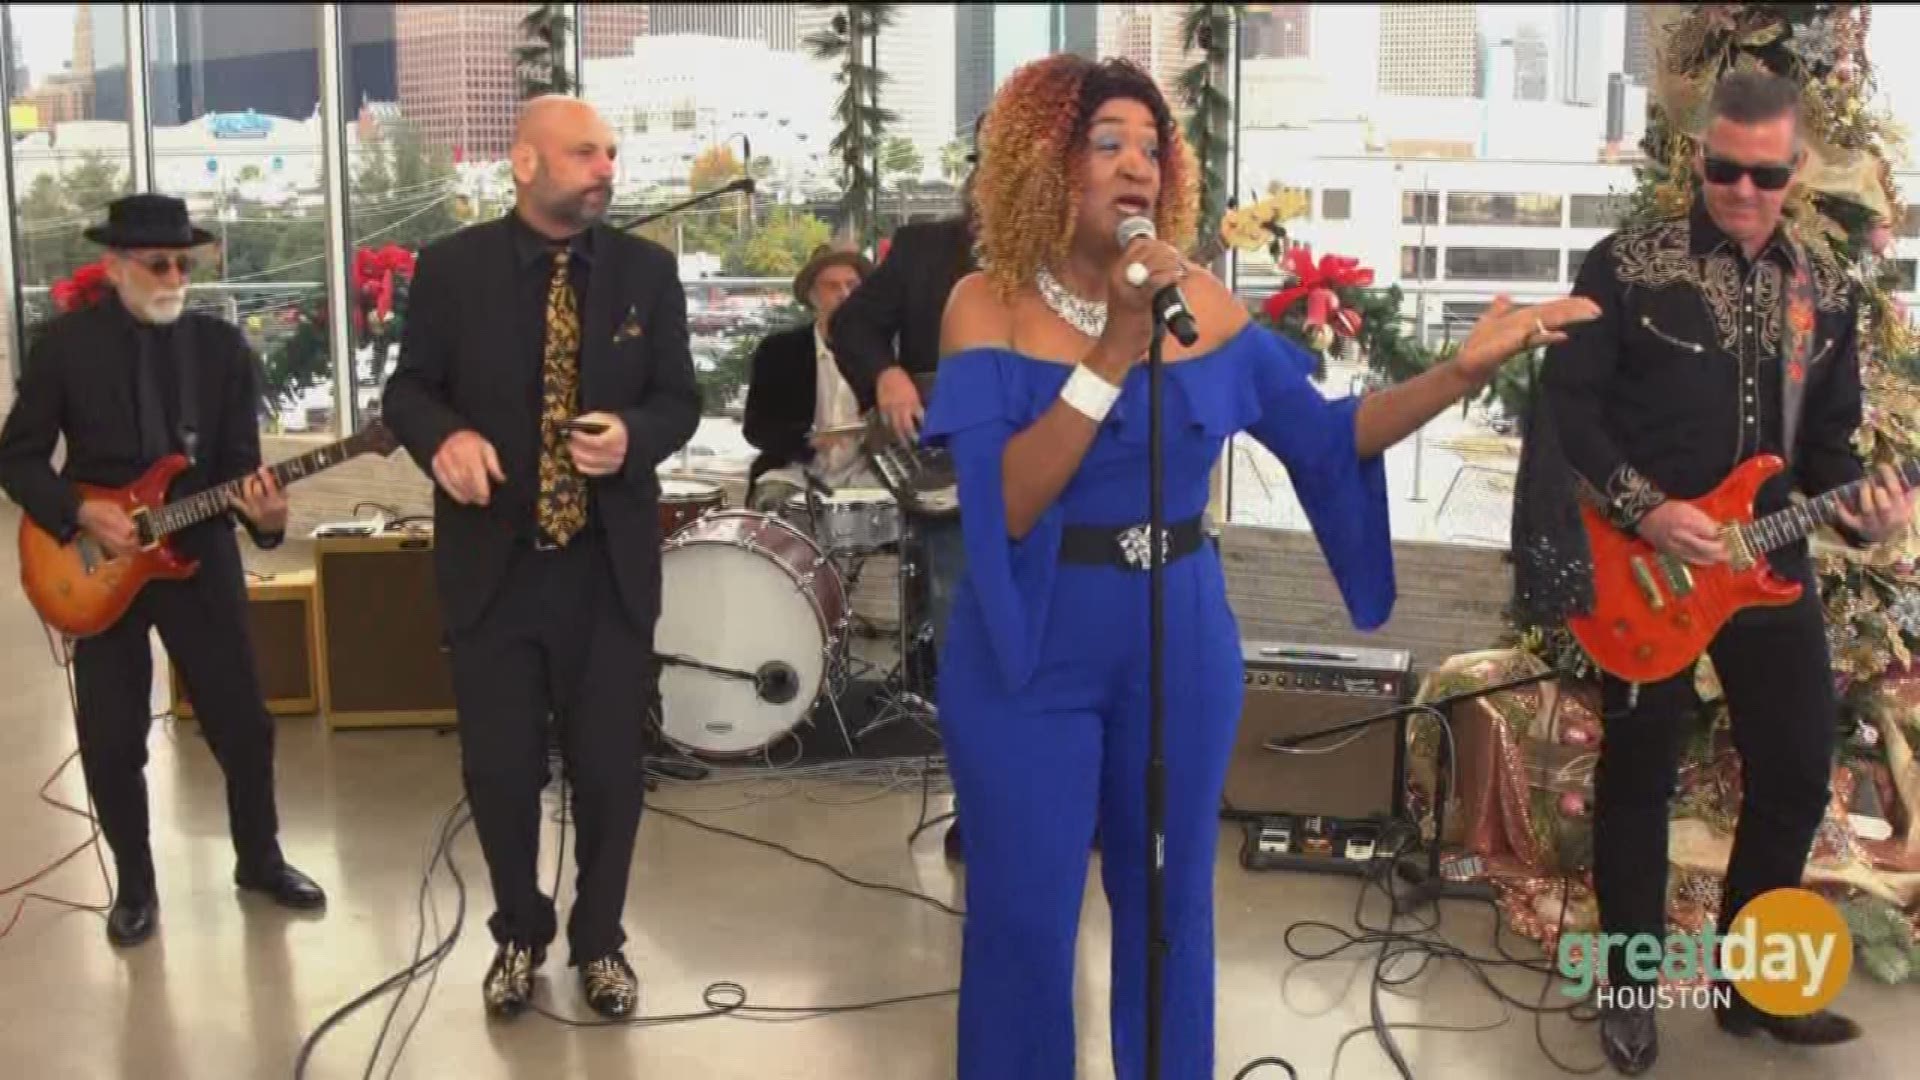 Living legend Trudy Lynn performs songs from her latest album